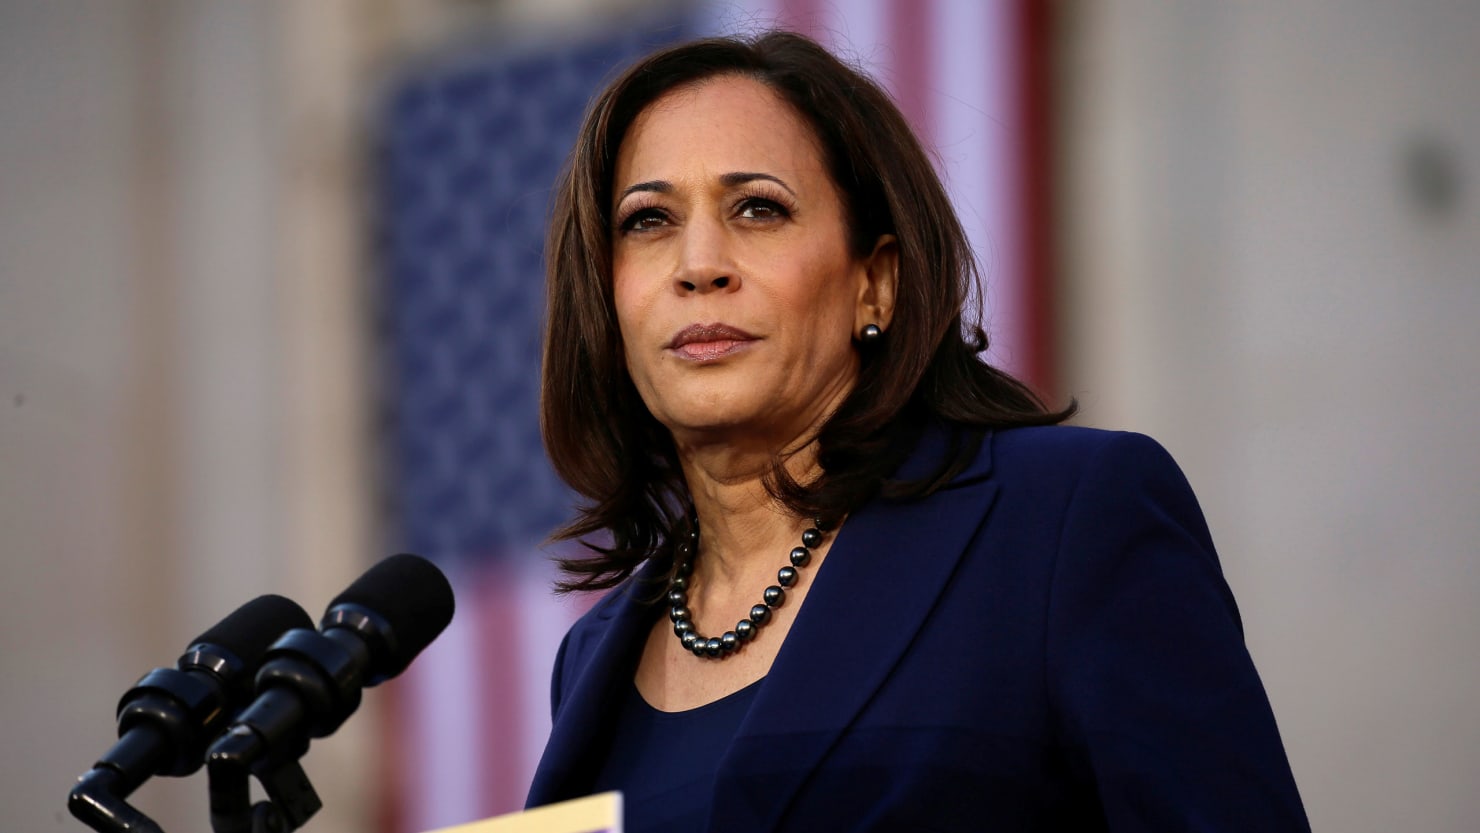 Trump Keeps Quiet on Kamala Harris While Dems Fret Over Her First Campaign Bump1480 x 833